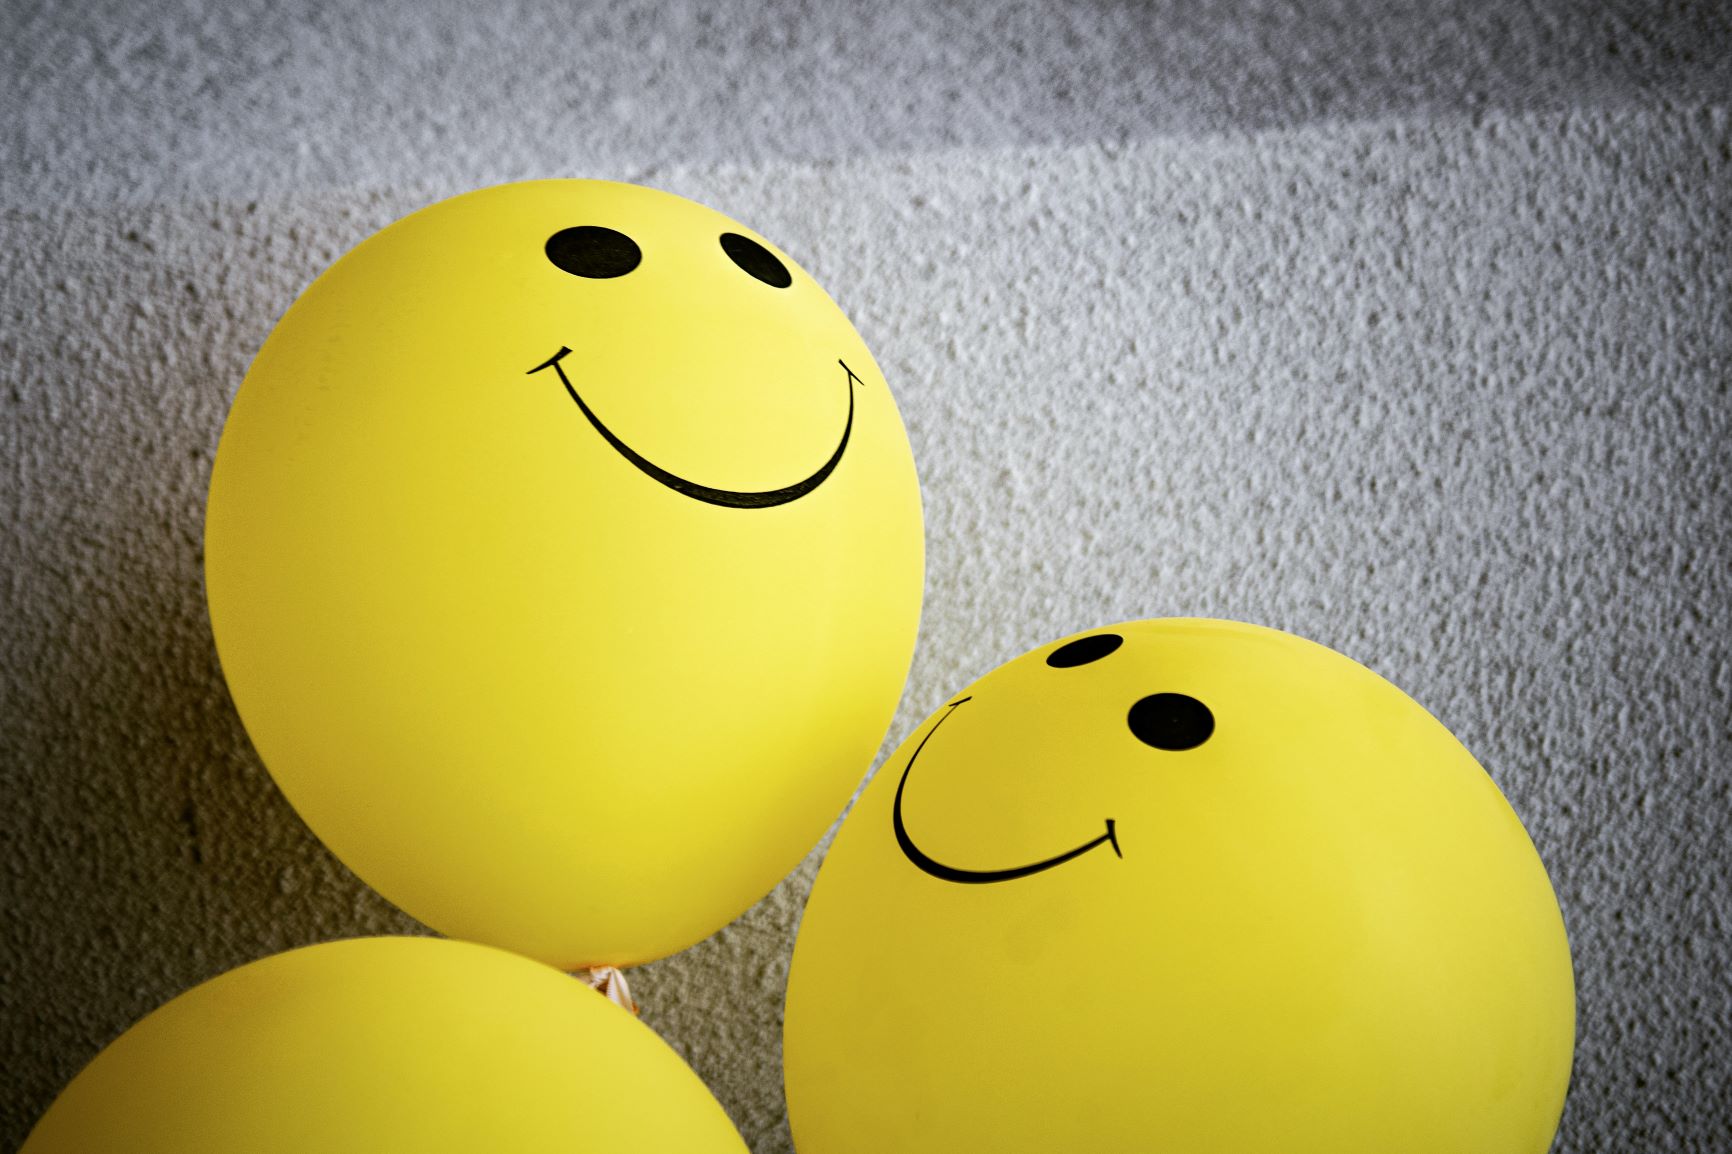 yellow balloons with smiley faces